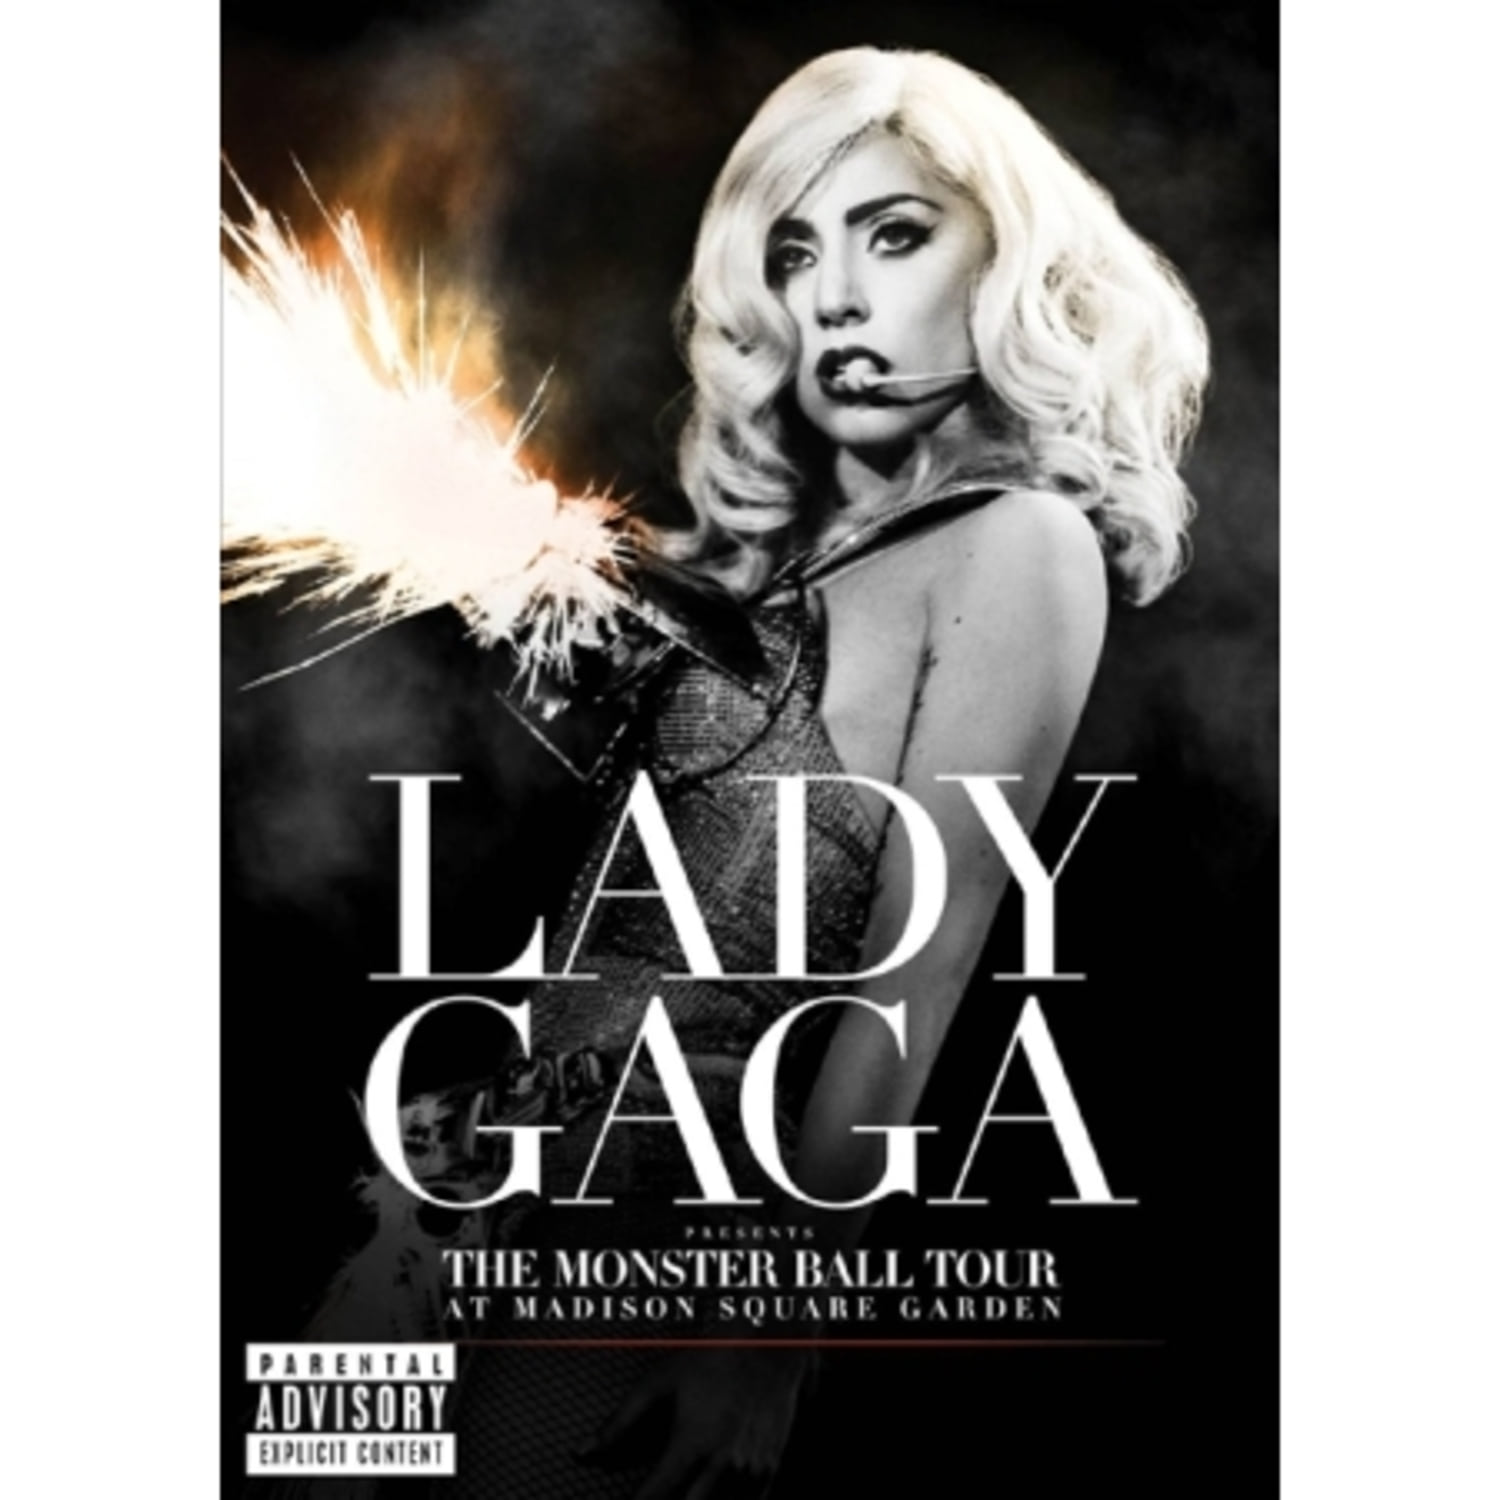 LADY GAGA - LADY GAGA PRESENTS : THE MONSTER BALL TOUR AT MADISON SQUARE GARDEN (1 DISC)